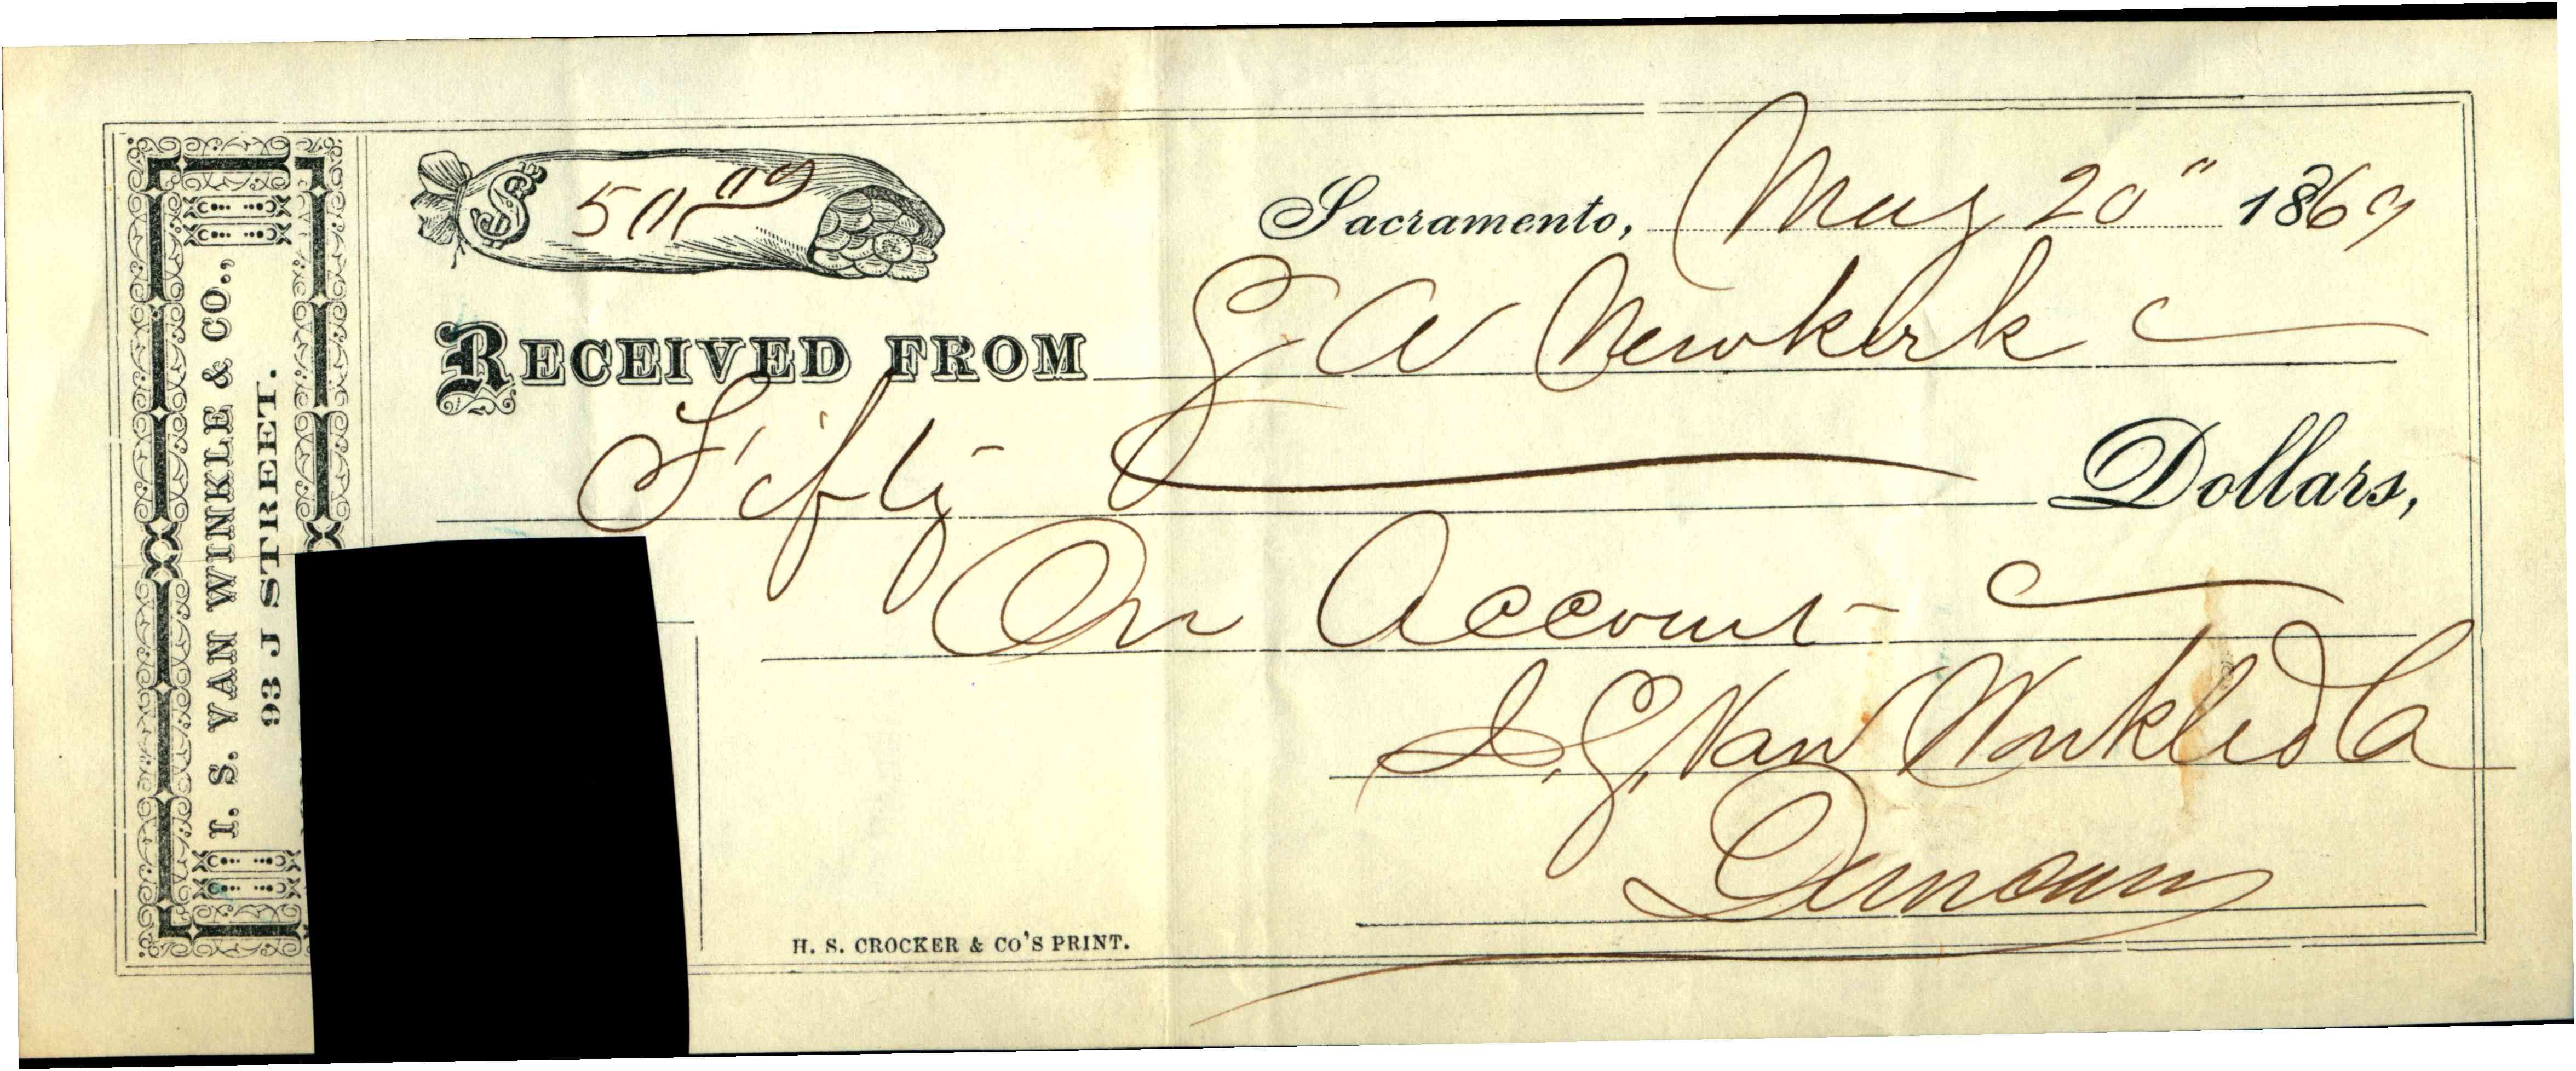 Three receipts dated: May 20, 1869, Sept. 18, 1869, & Dec. 28, 1869